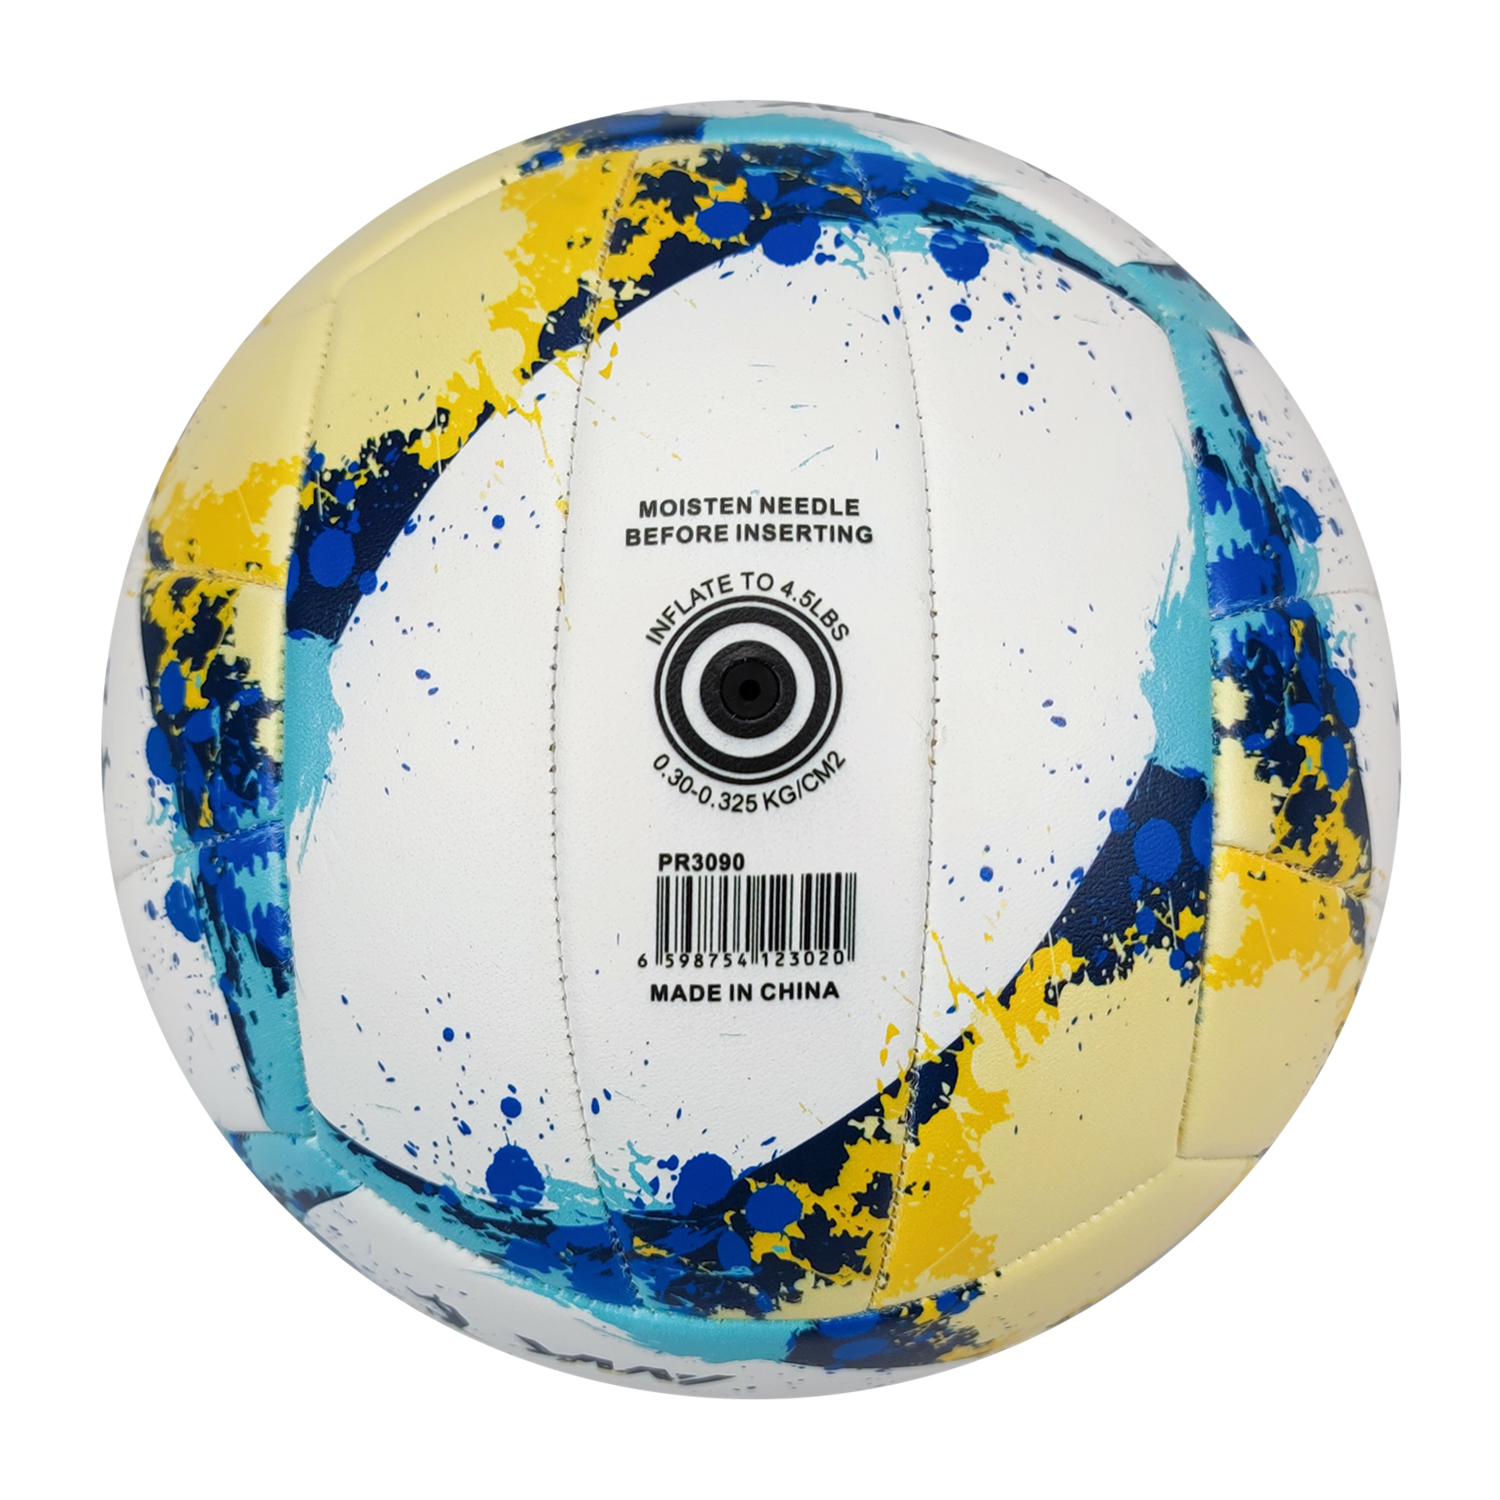 volley ball inflatable official size weight adults PVC leather Material volleyball balls